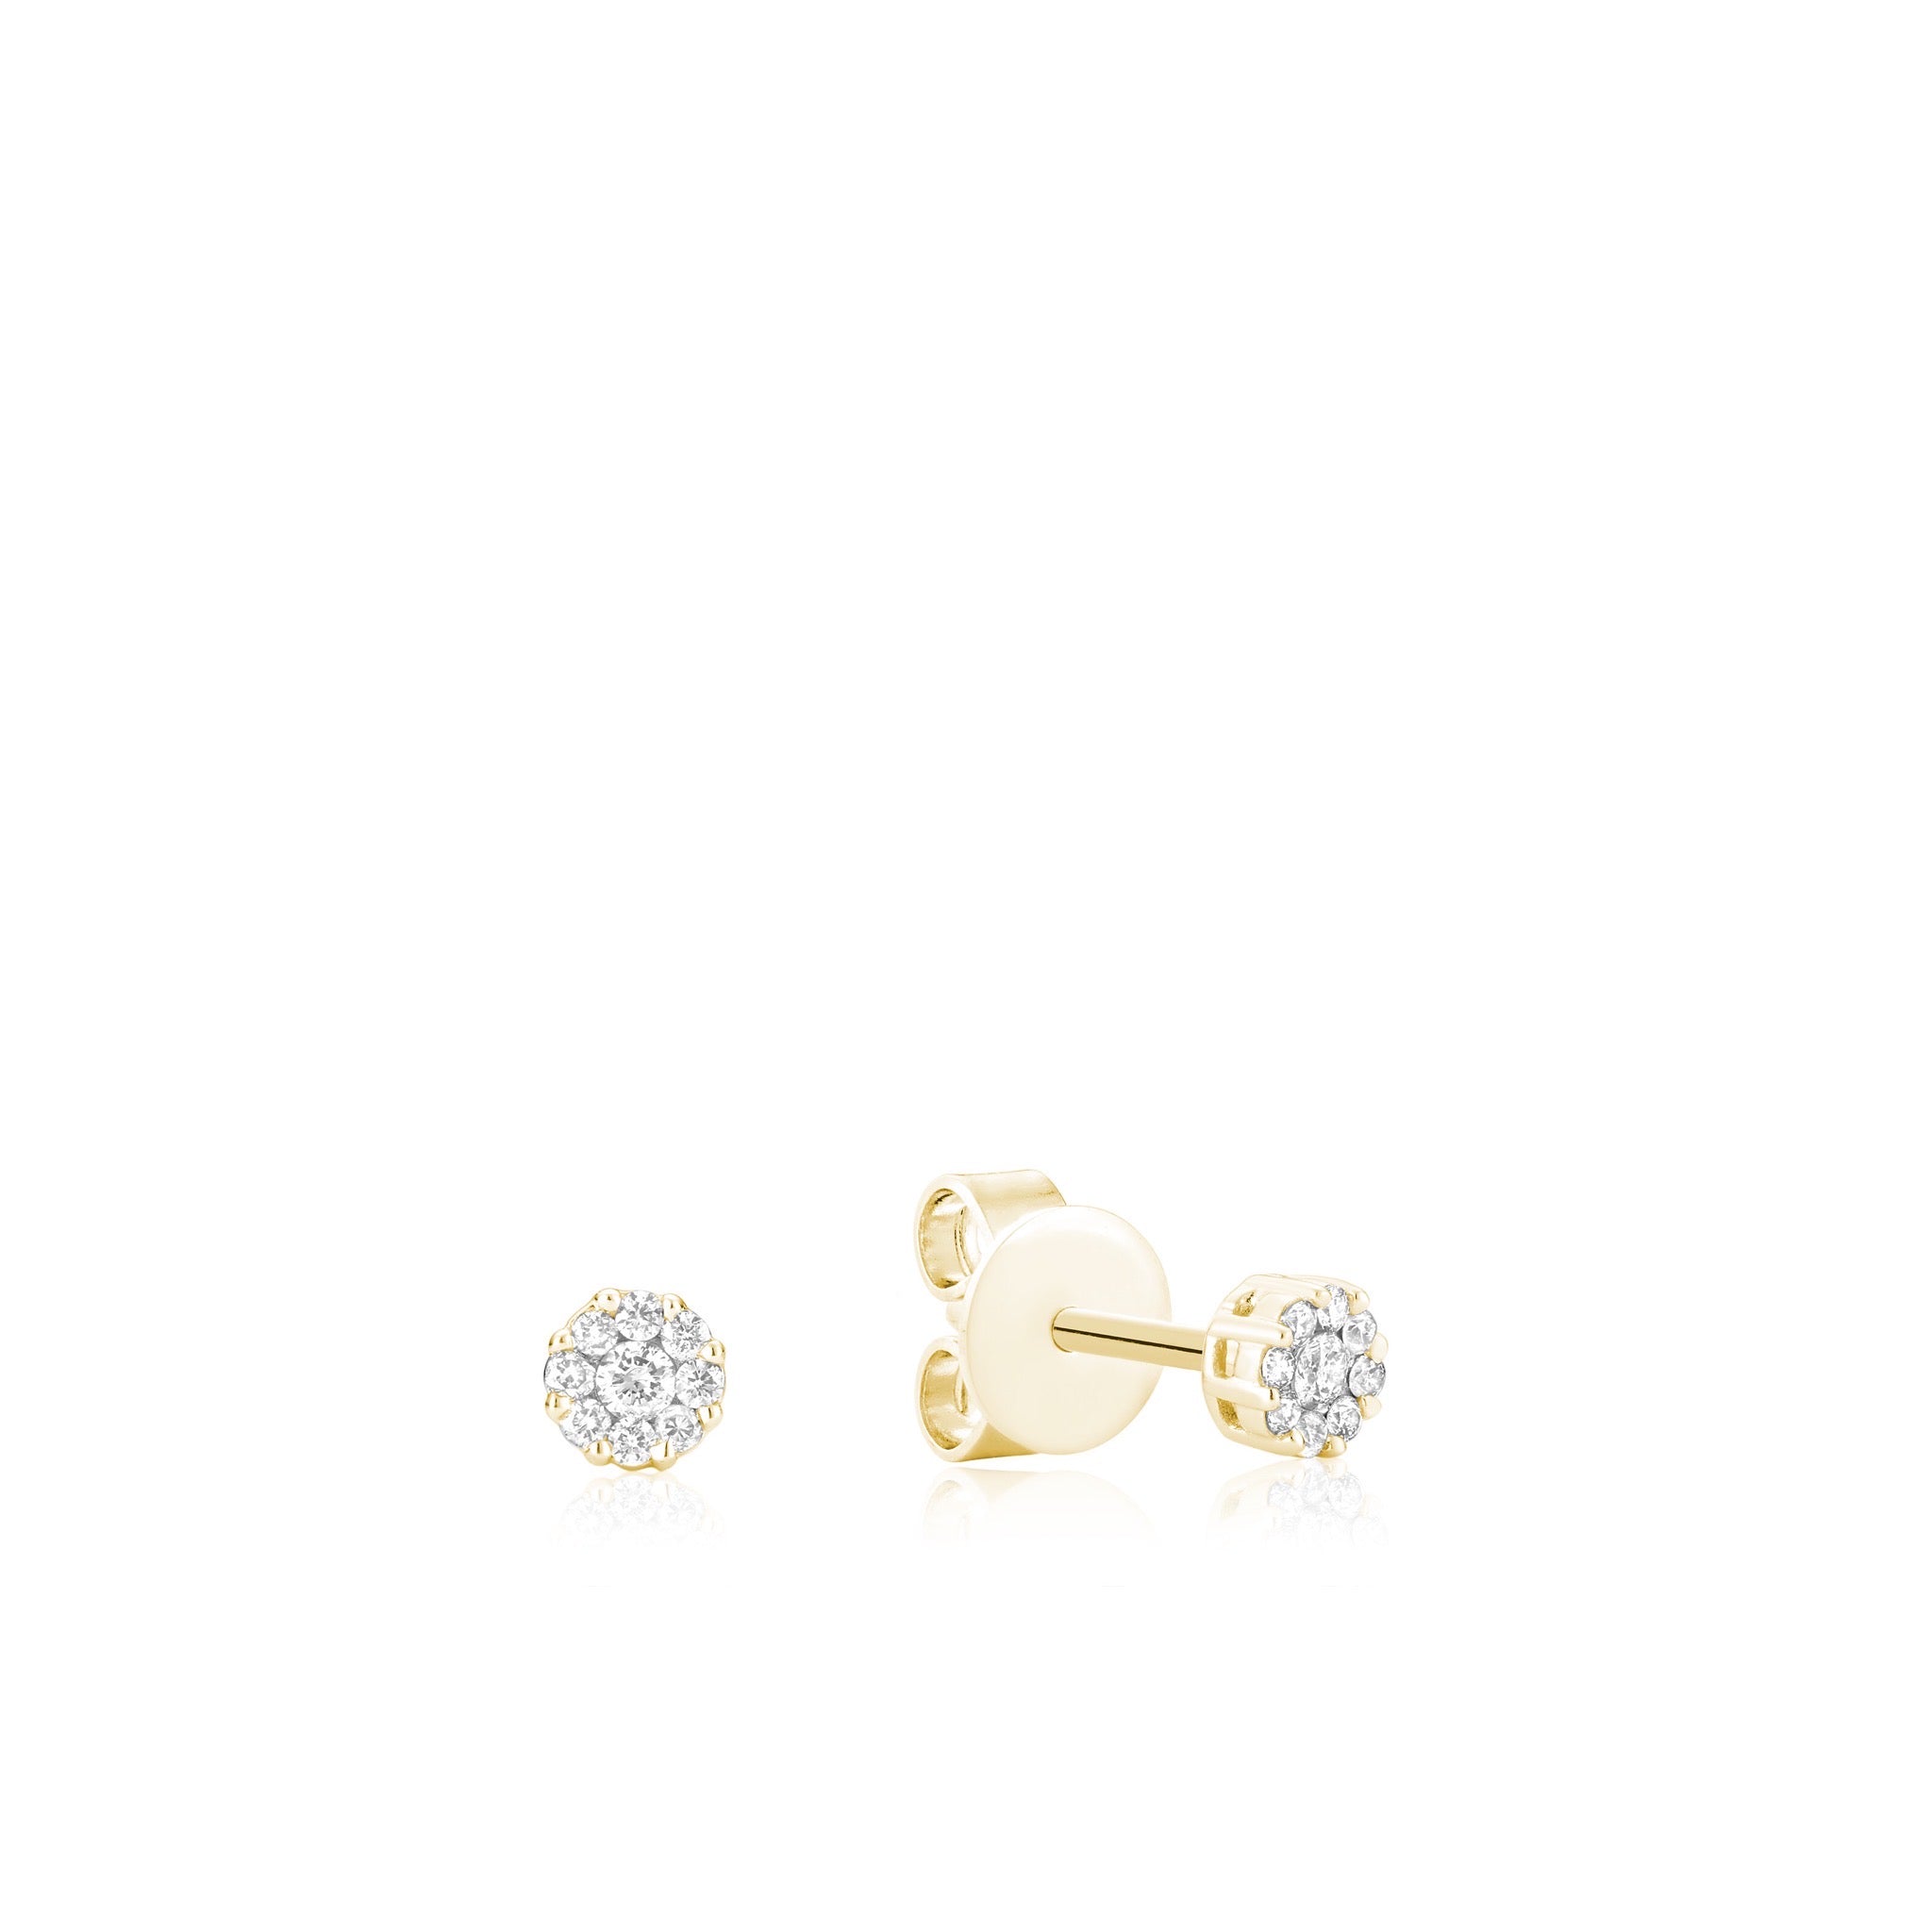 Exquisite diamond cluster stud earrings encased in warm 14kt yellow gold, showcasing unparalleled elegance and classic beauty.